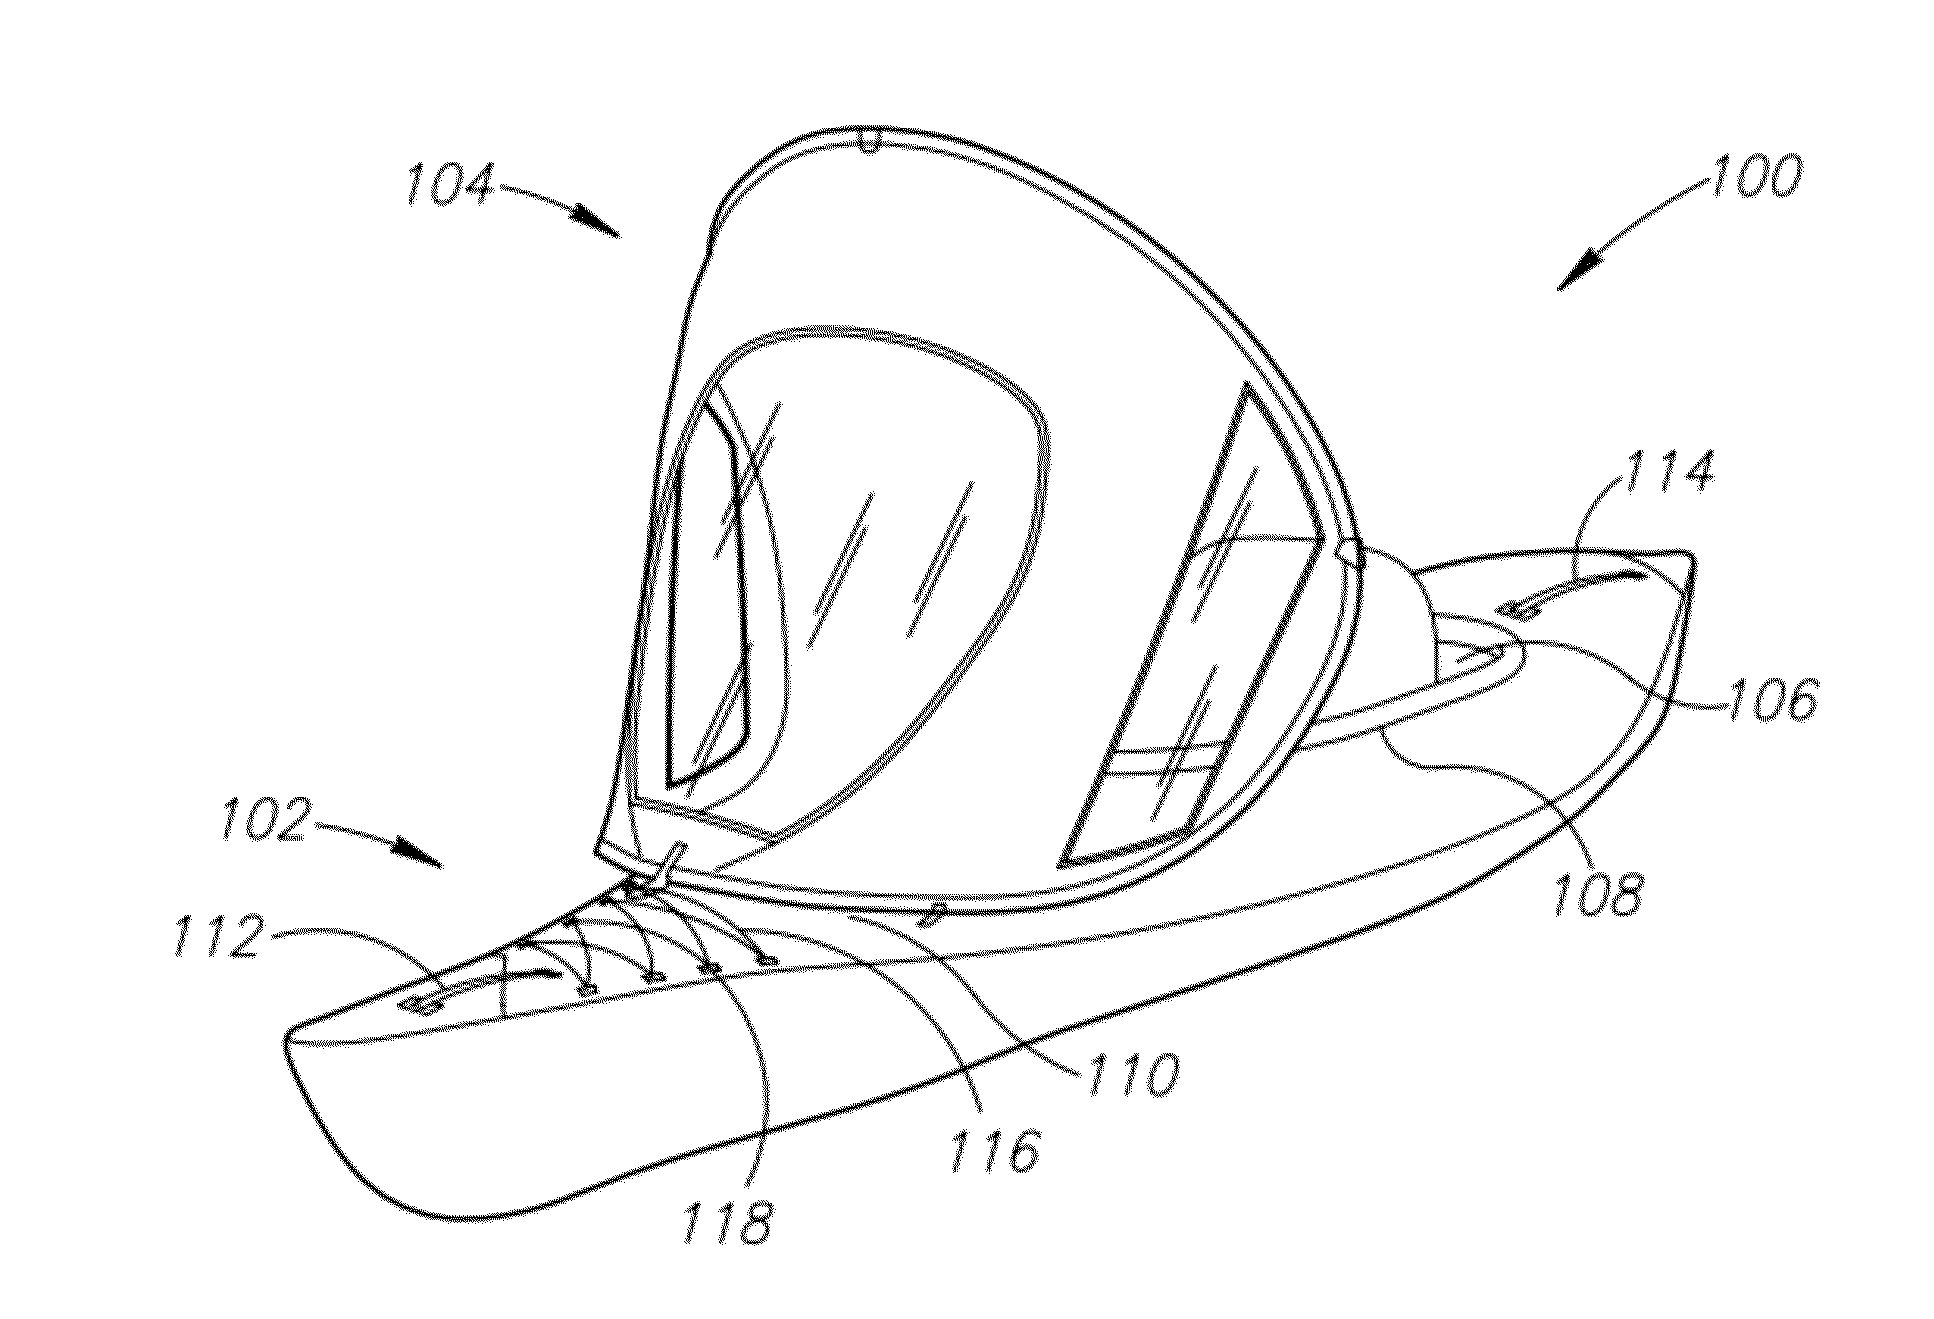 Portable sail for paddle-type vessels